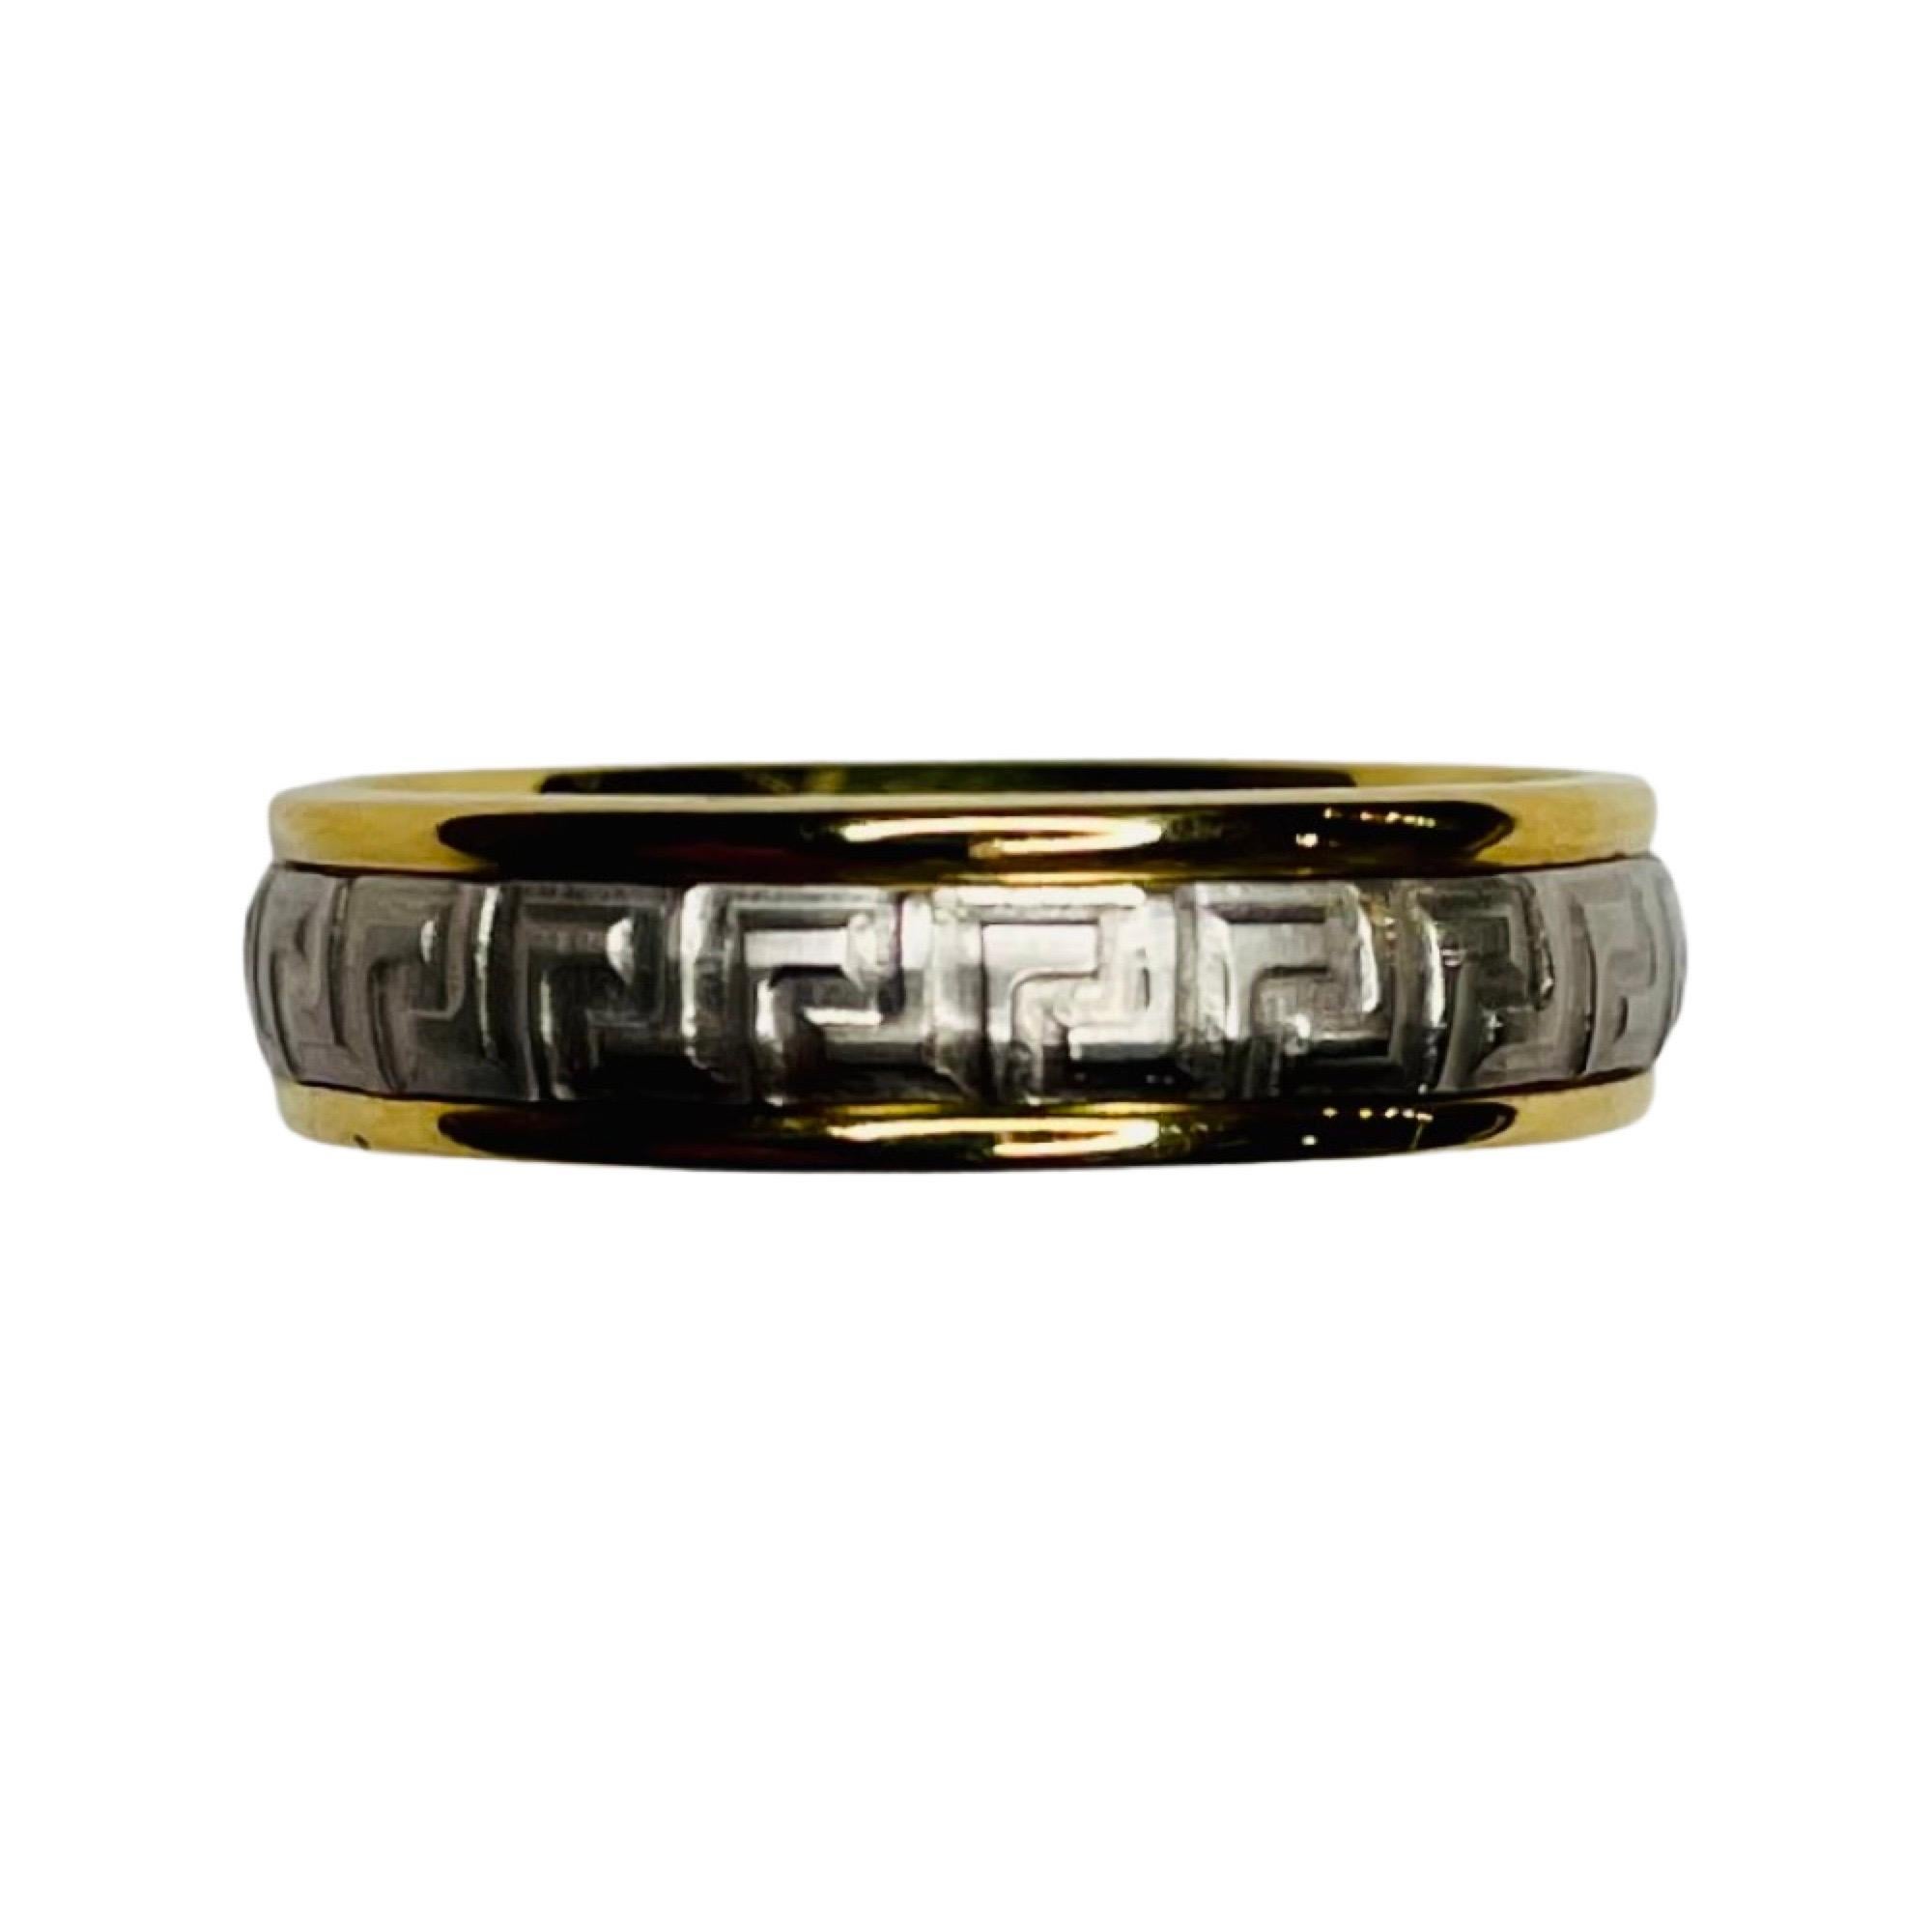 Benchmark 18K Yellow Gold and Platinum Wedding Band. This is a comfort fit band. The band is 18KY Gold on the outside and Platinum on the inside.  The yellow gold has a high polish finish and the platinum has a matte finish. It has the Greek key